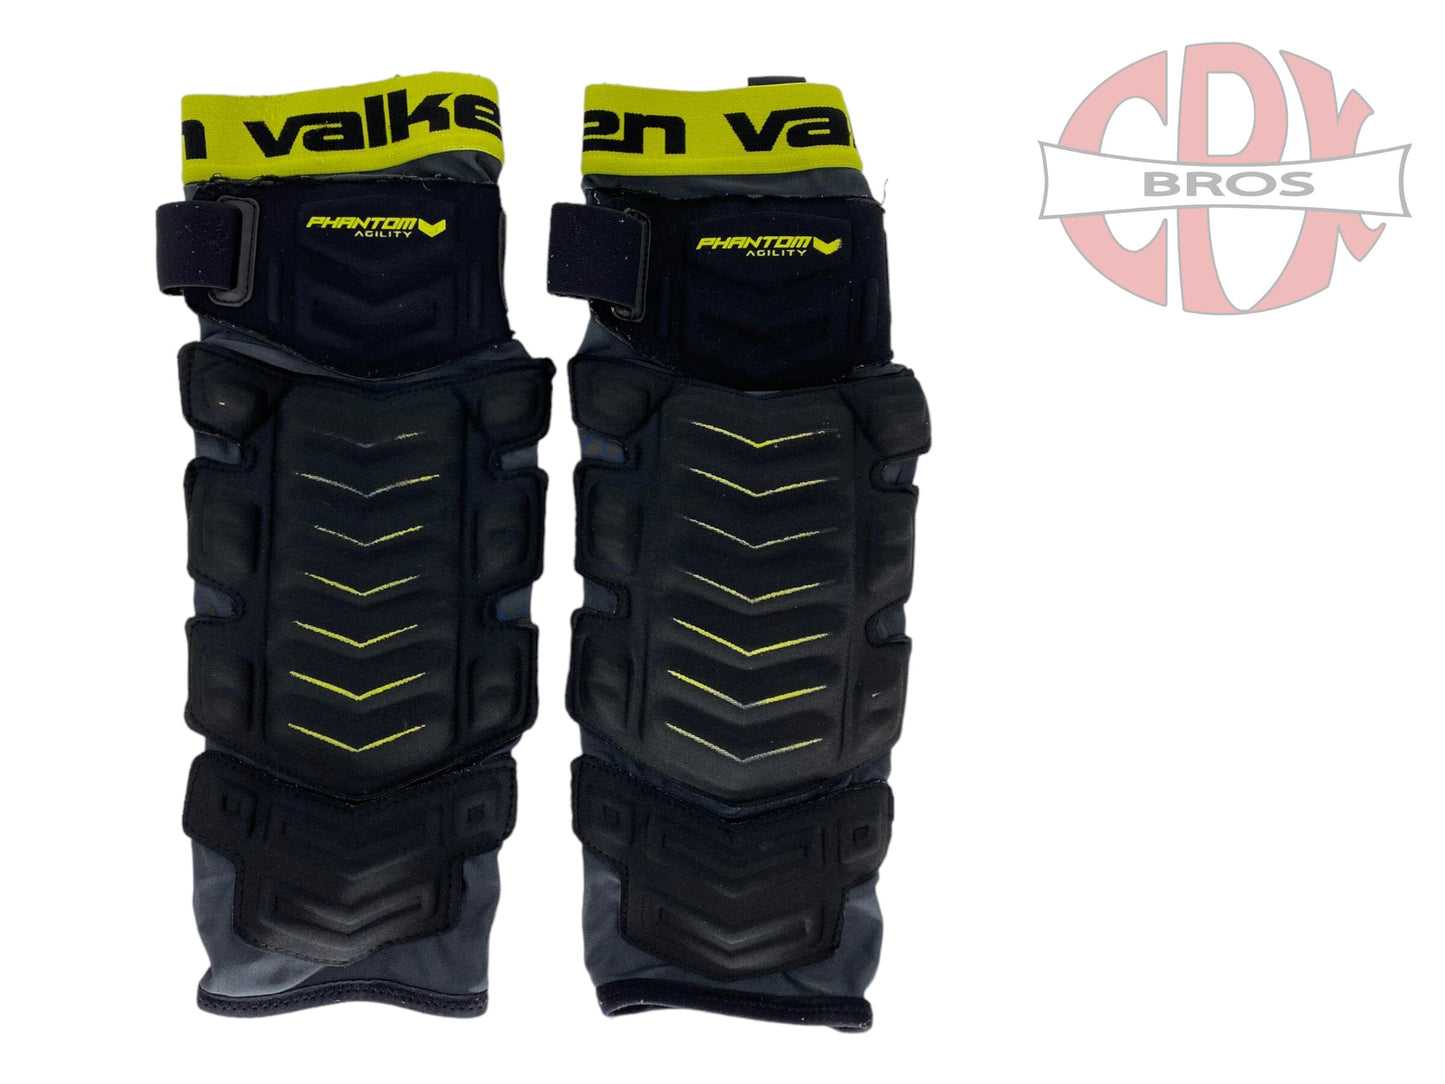 Used Valken Phantom Agility Knee Pads Elbow size L Paintball Gun from CPXBrosPaintball Buy/Sell/Trade Paintball Markers, Paintball Hoppers, Paintball Masks, and Hormesis Headbands